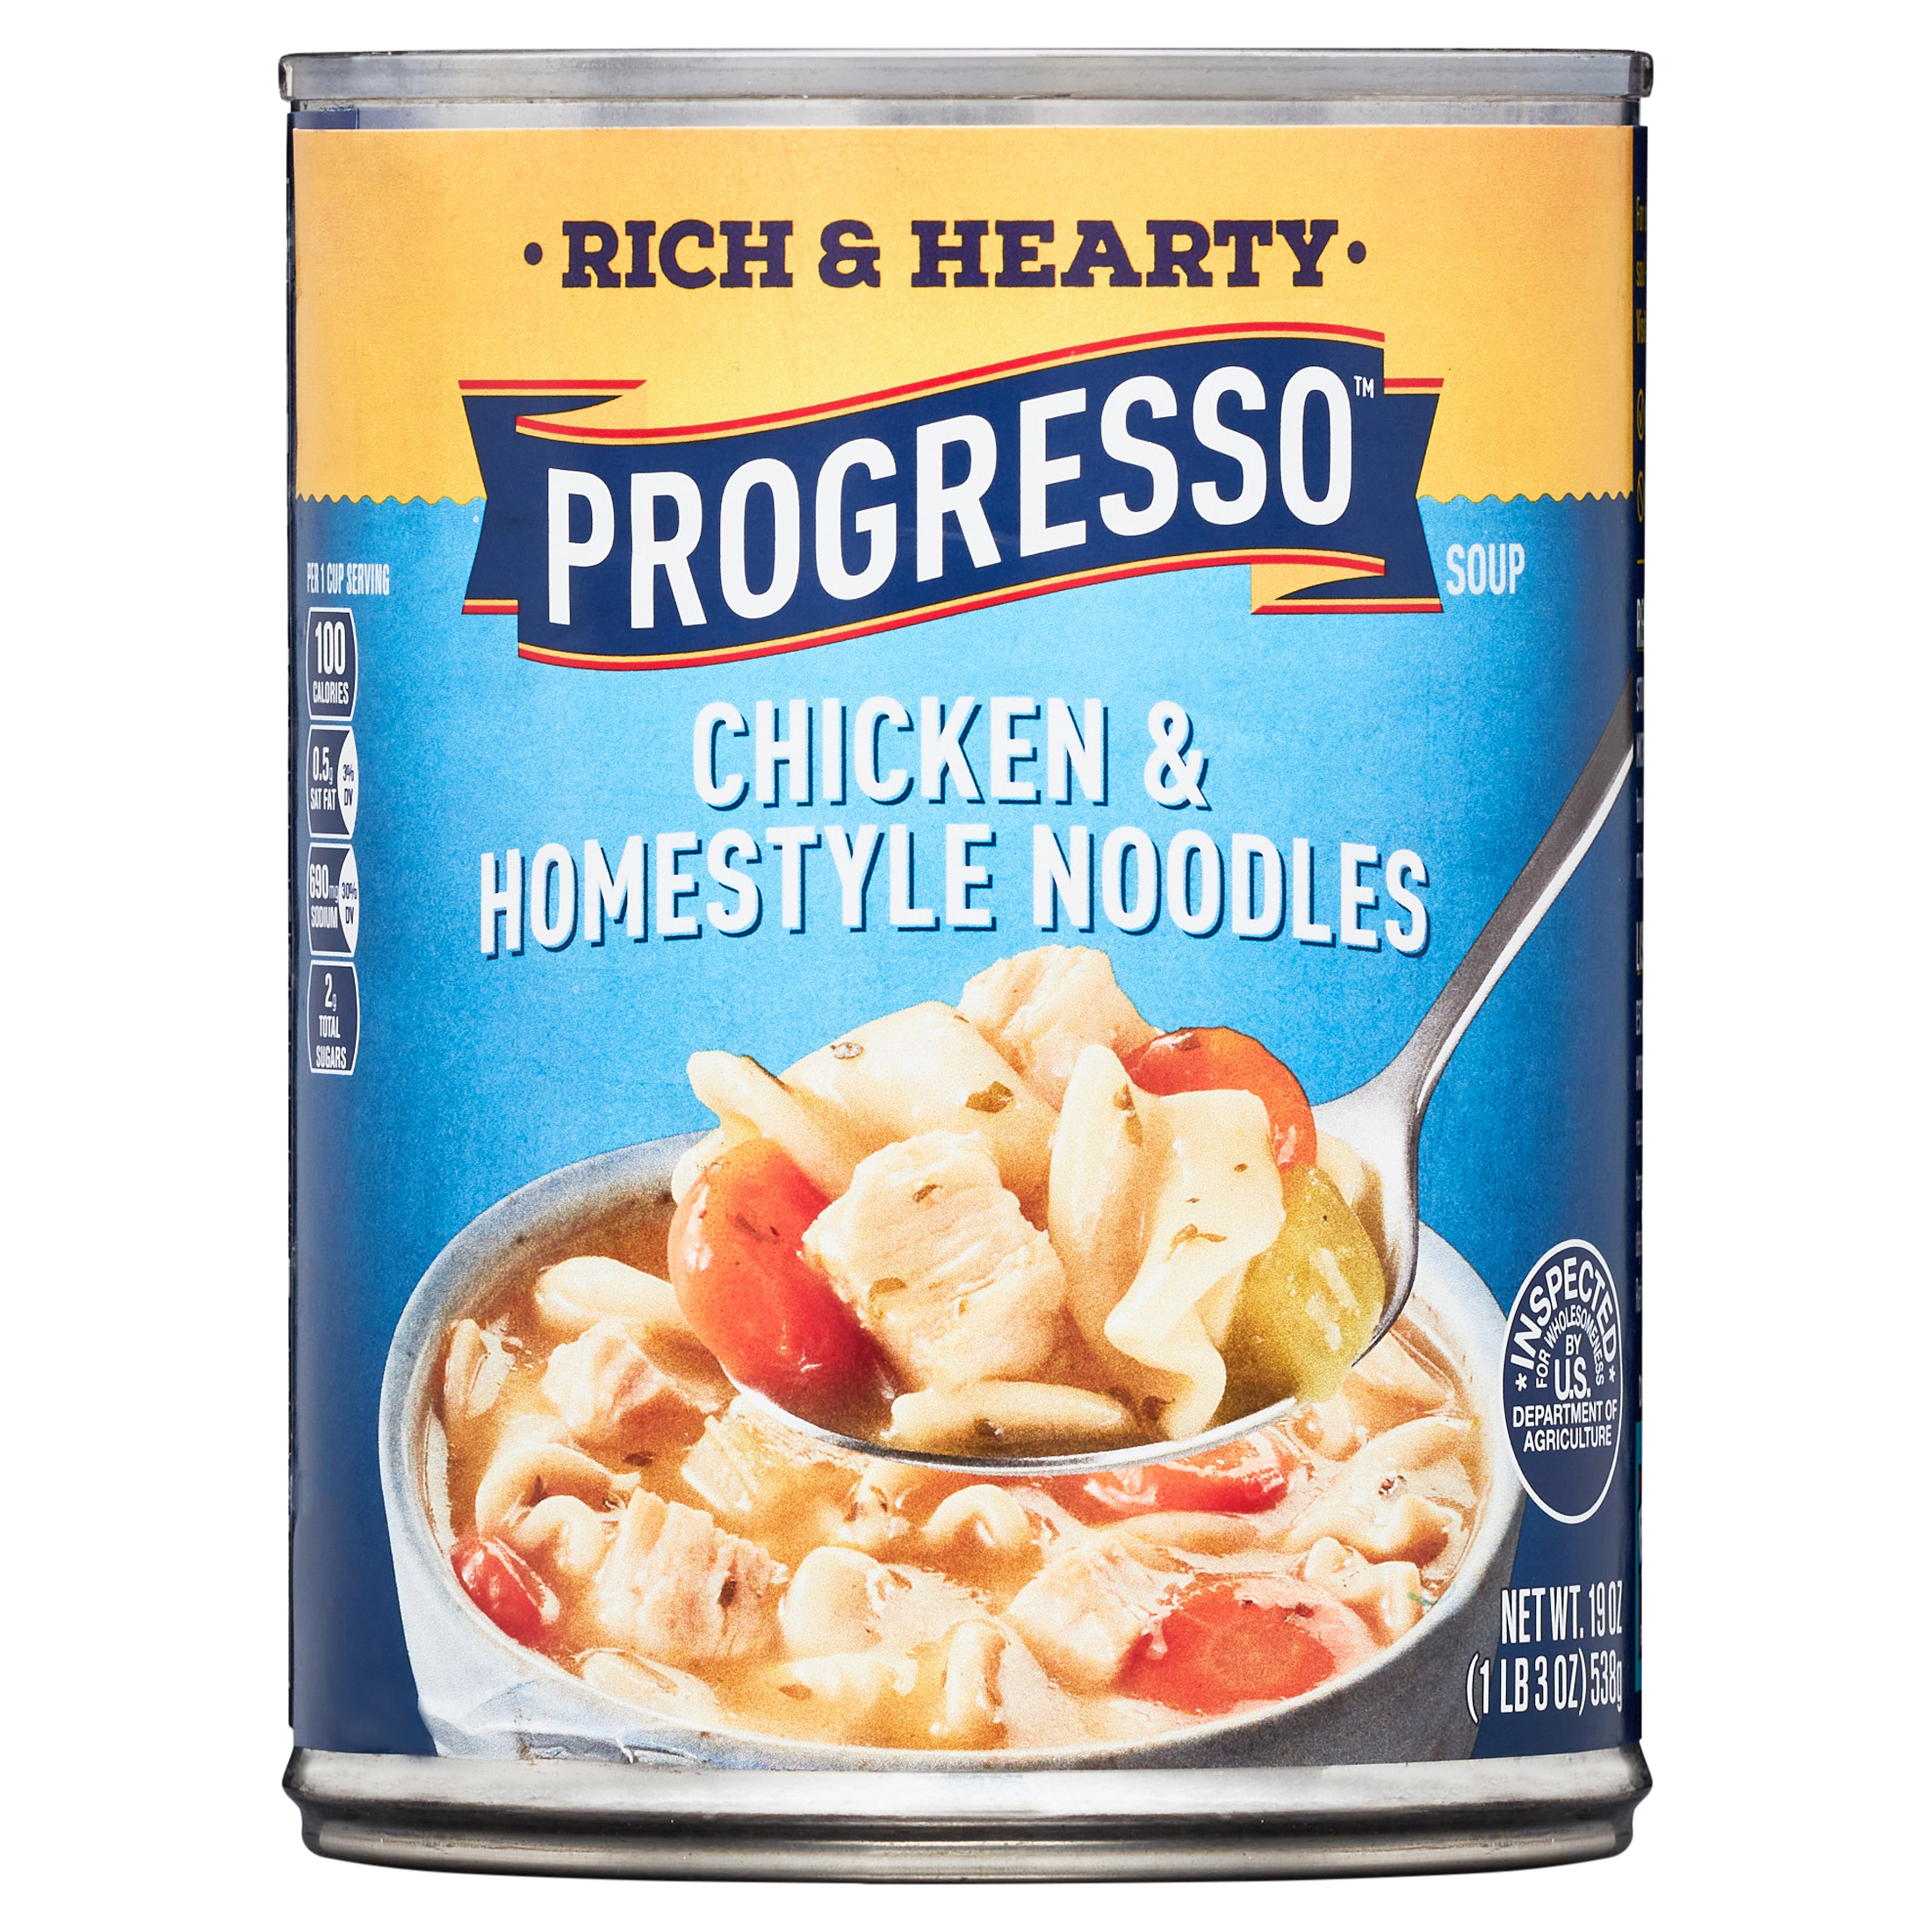 Progresso Rich & Hearty, Chicken & Homestyle Noodle Canned Soup, 19 oz. - image 1 of 9